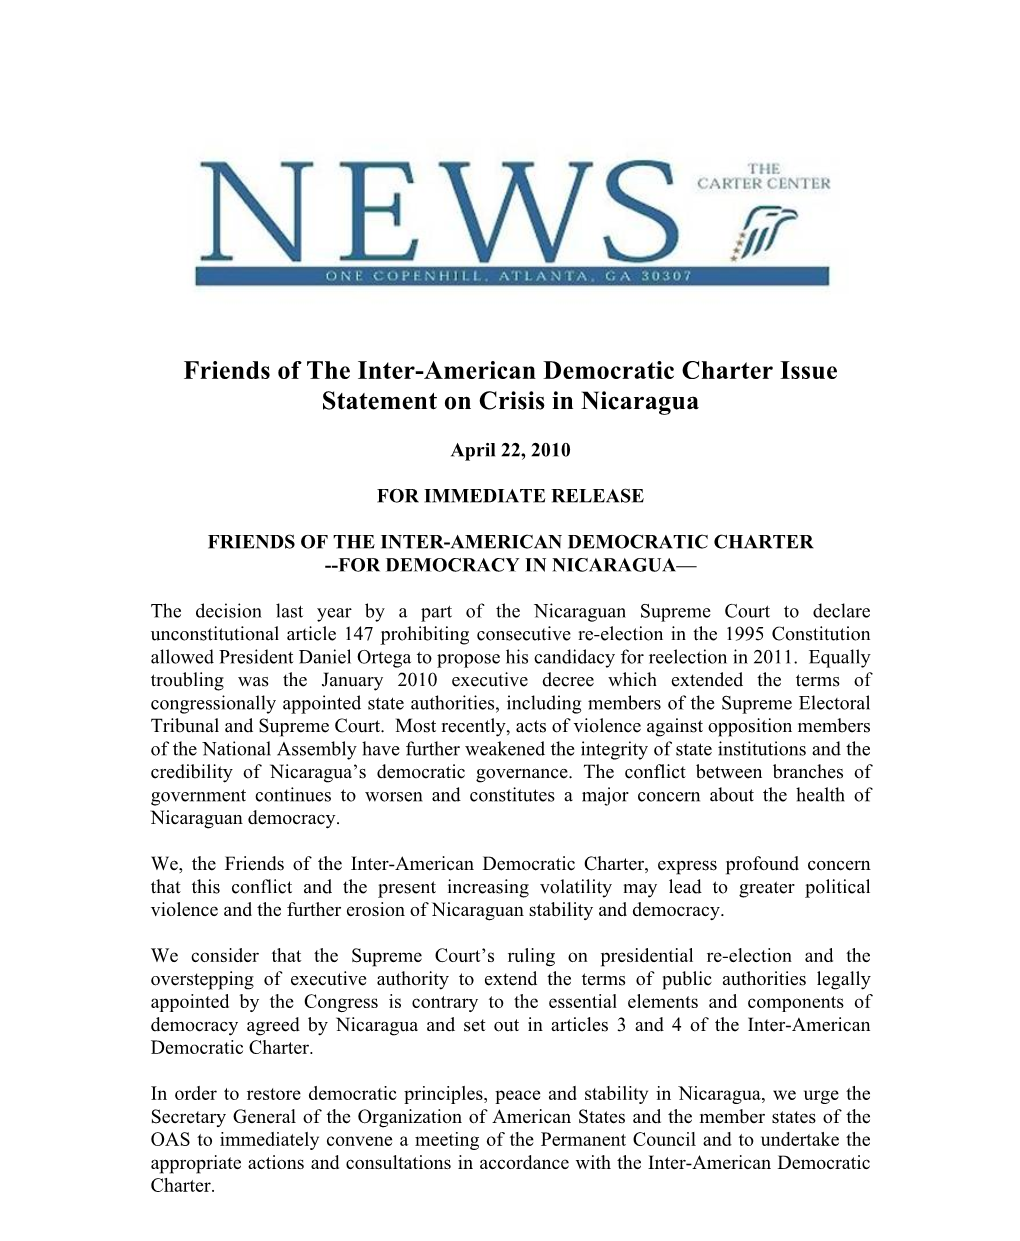 Friends of the Inter-American Democratic Charter Issue Statement on Crisis in Nicaragua